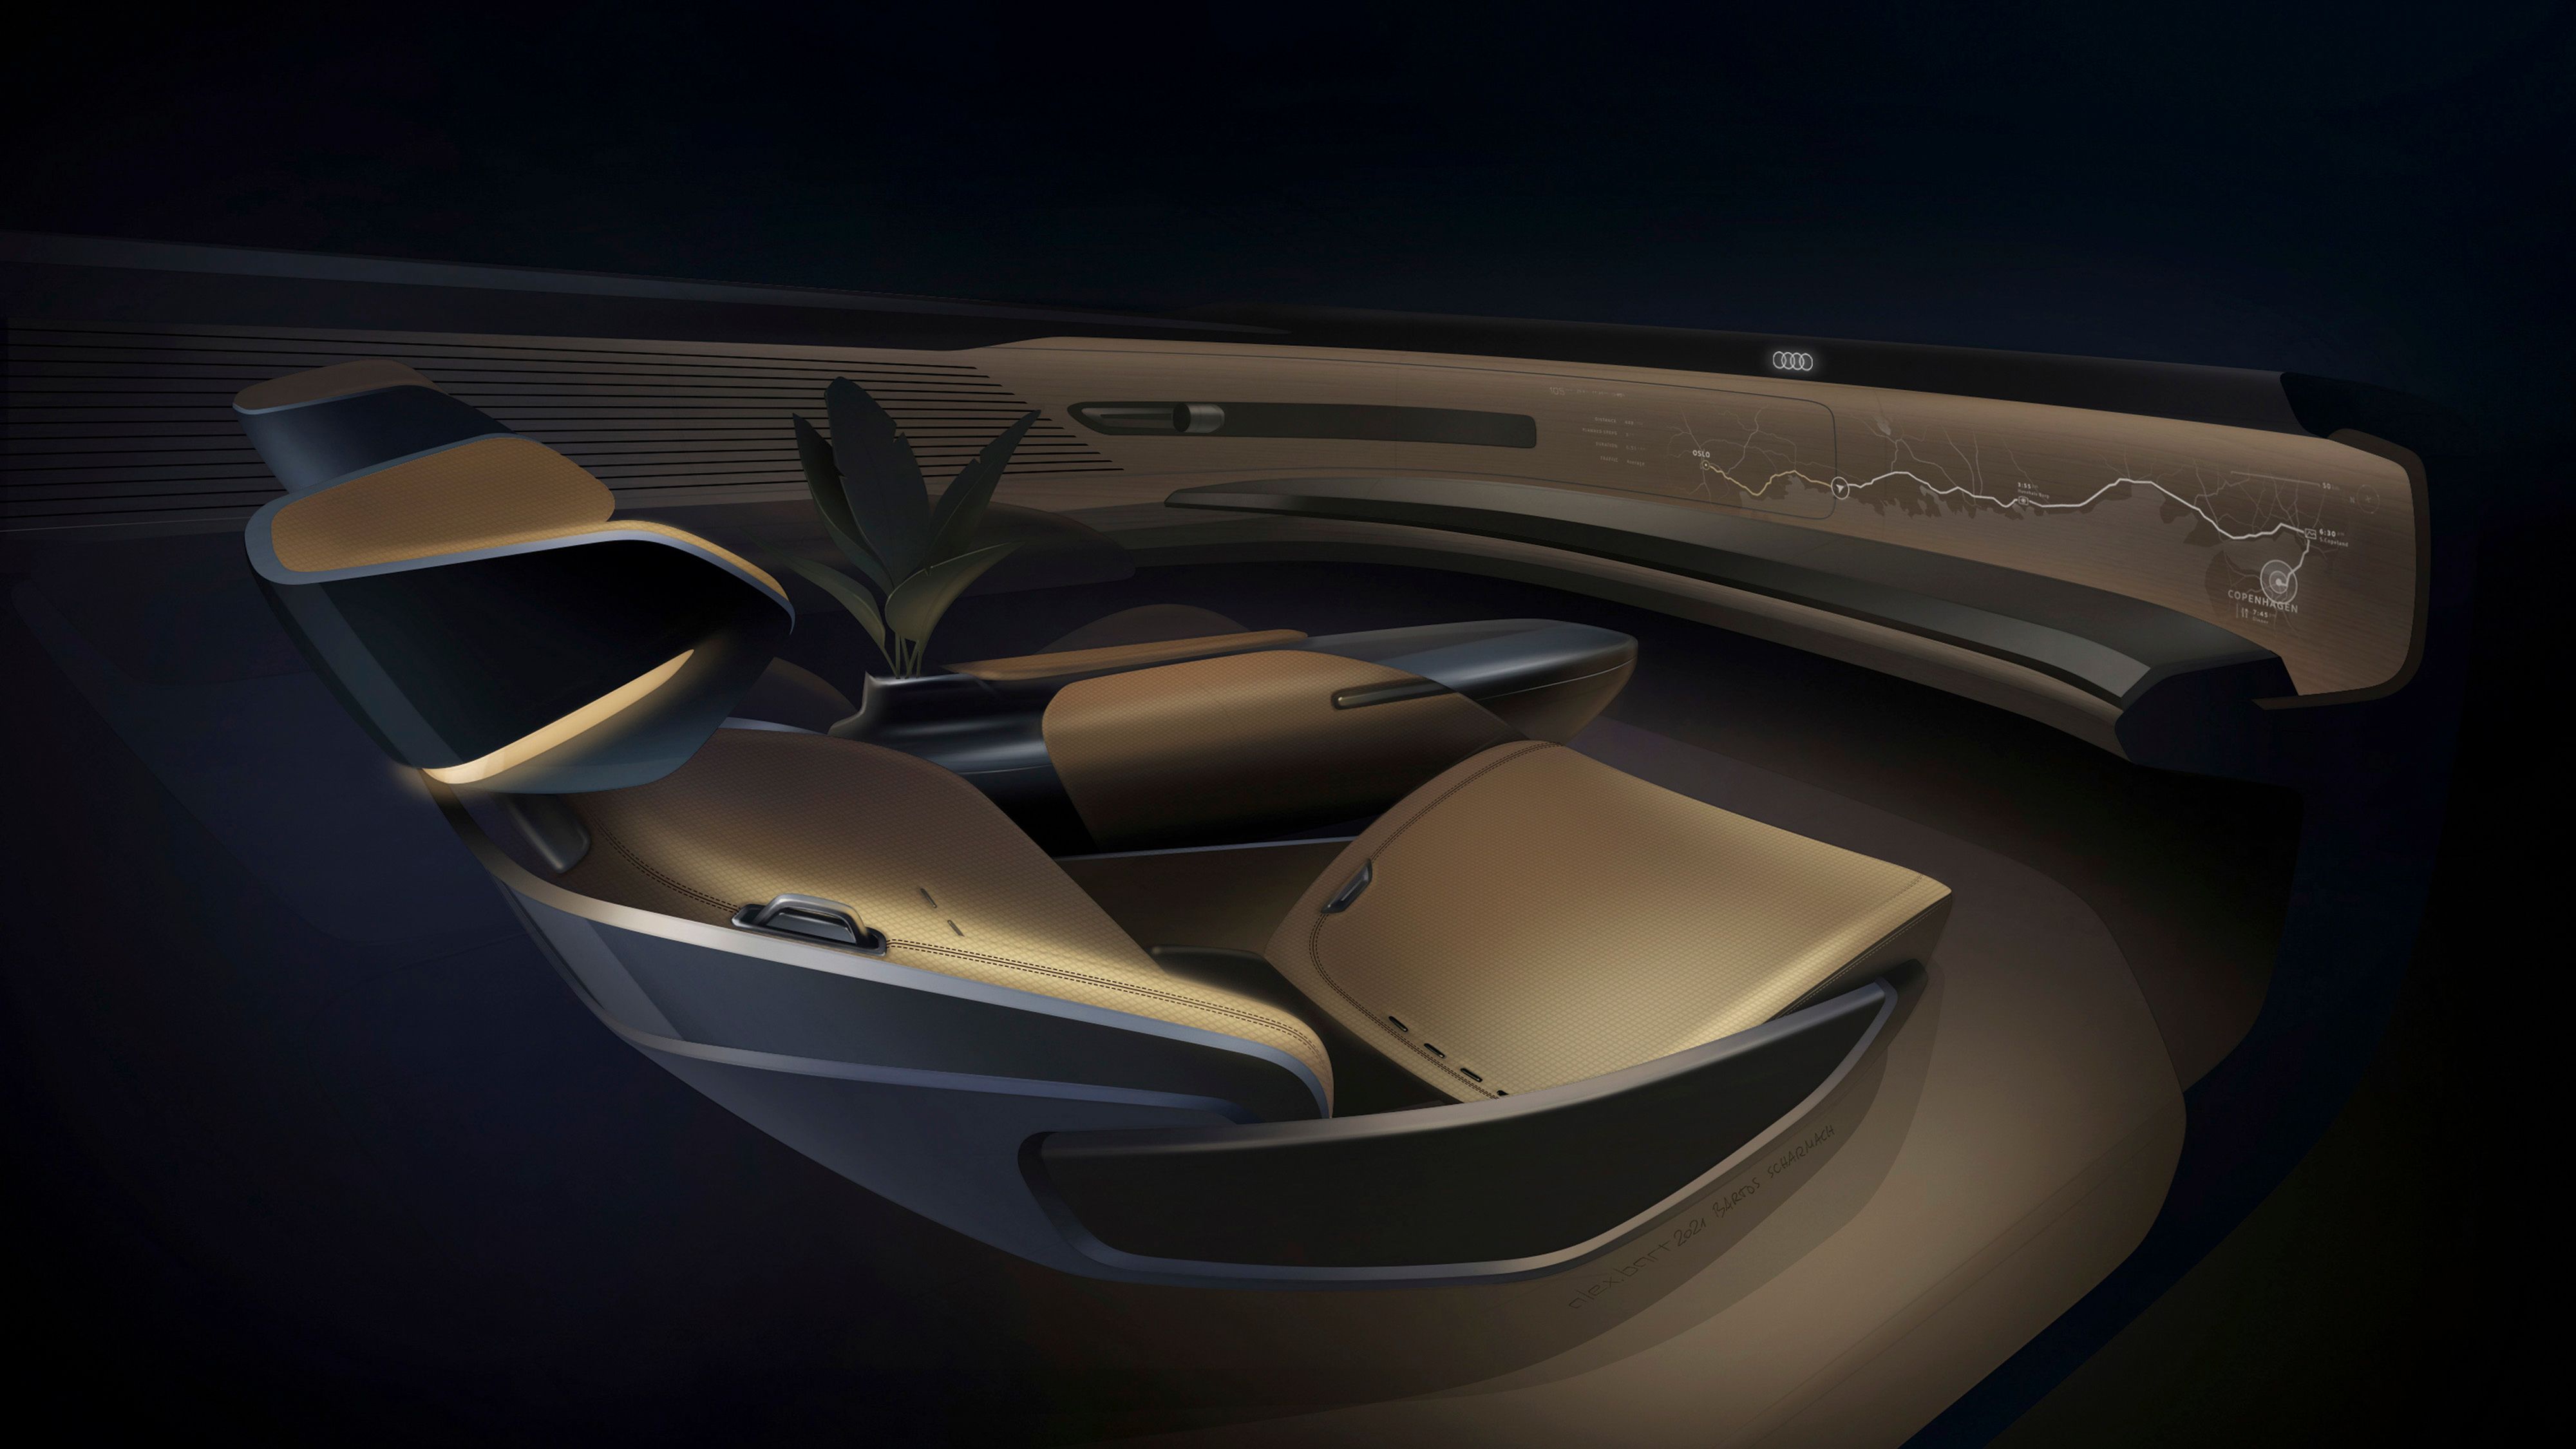 Audi Grandsphere Concept - A Luxurious EV That's A 'Private Jet For The Roads' 